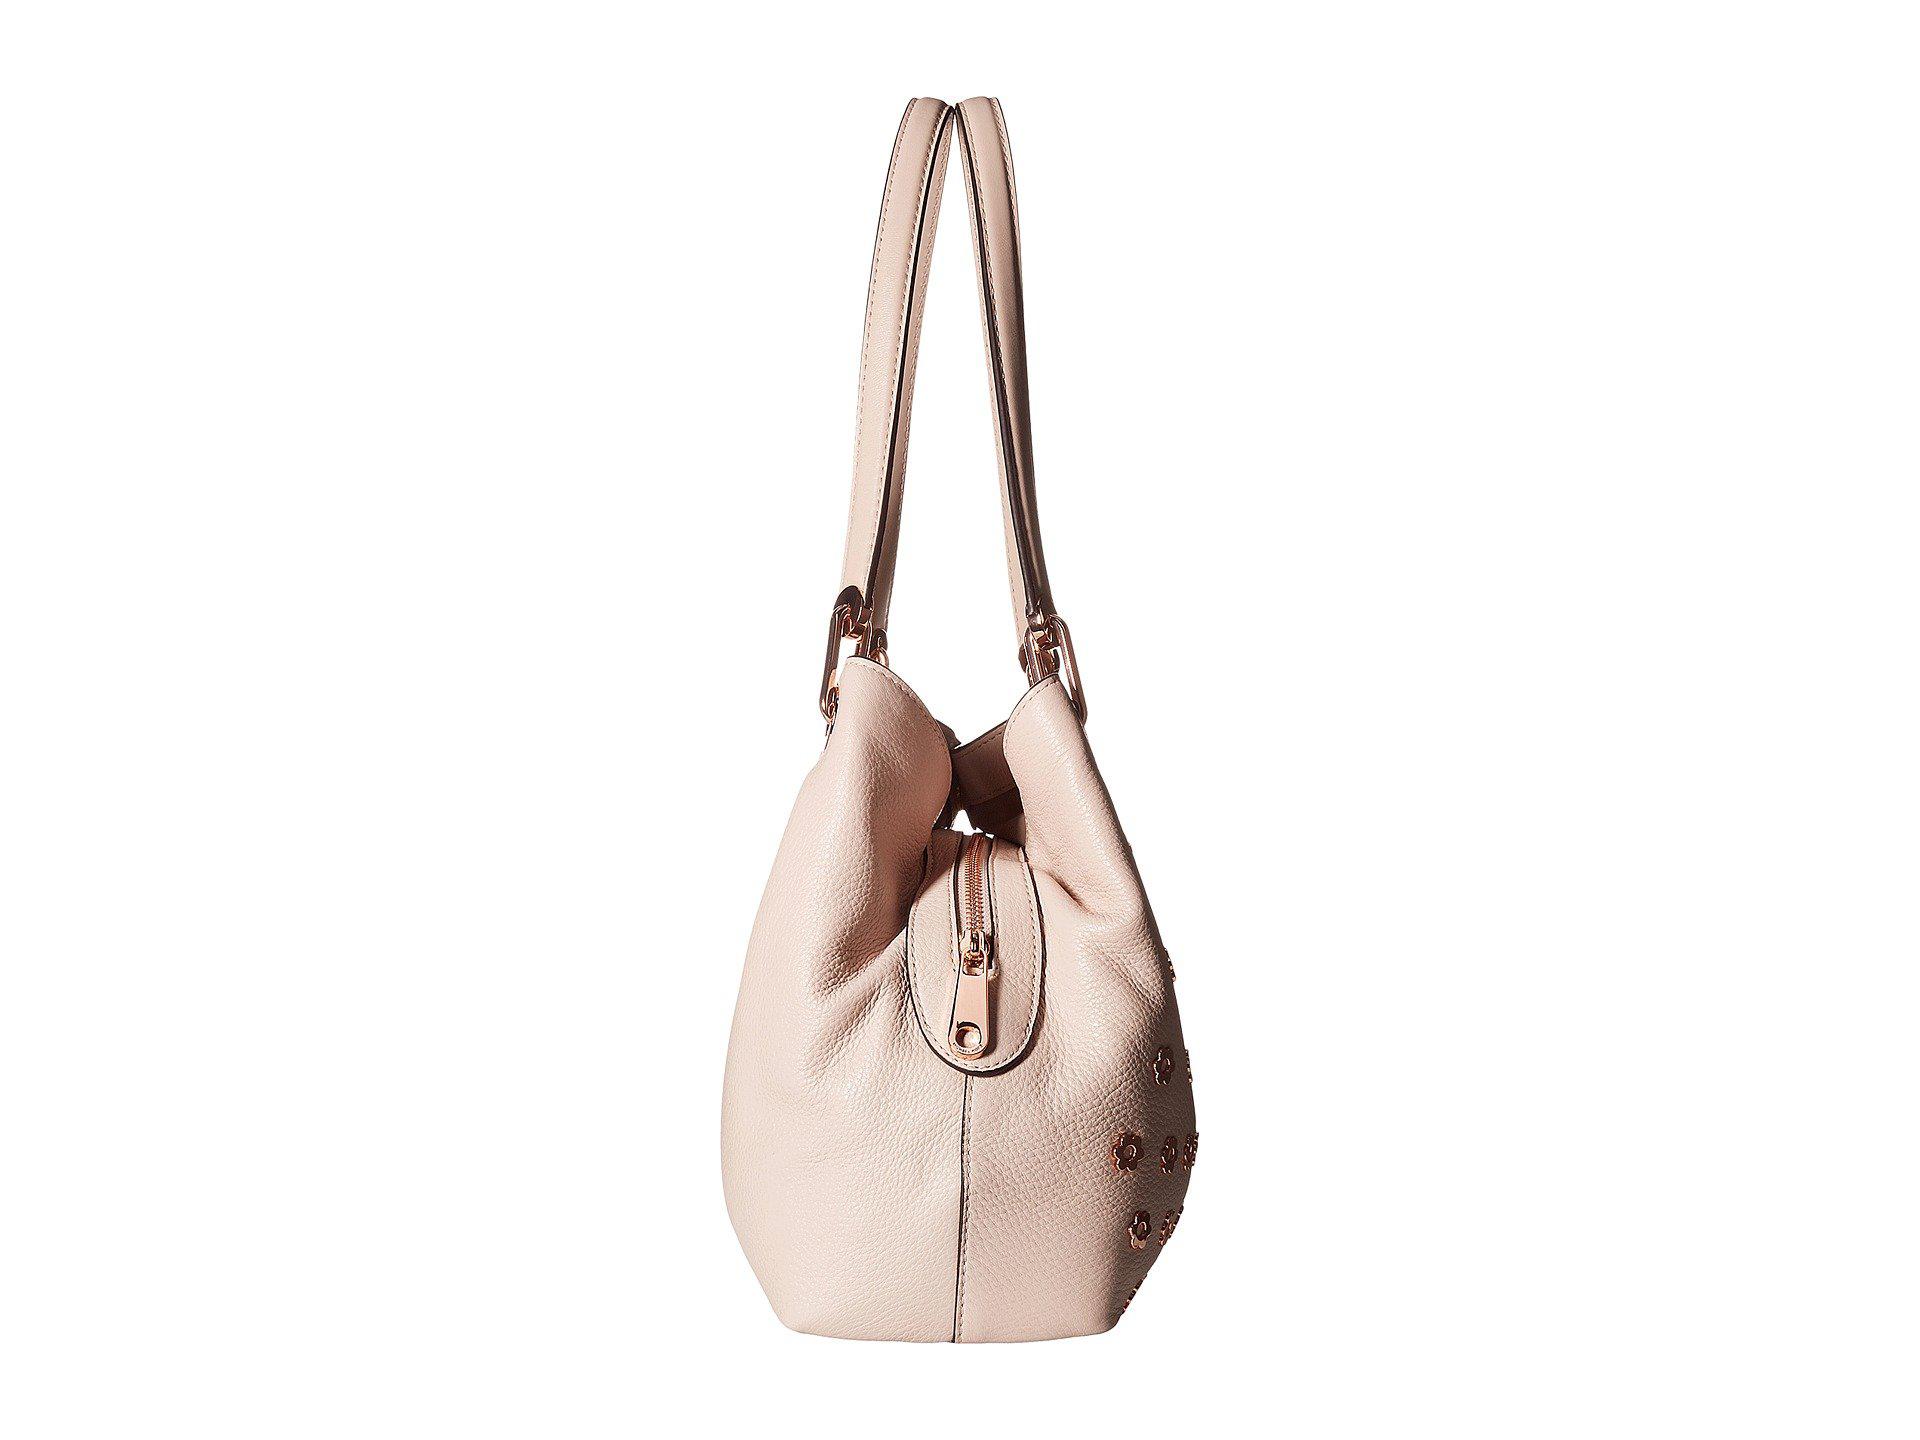 MICHAEL Michael Kors Leather Raven Large Shoulder Tote in Soft Pink (Pink) - Lyst